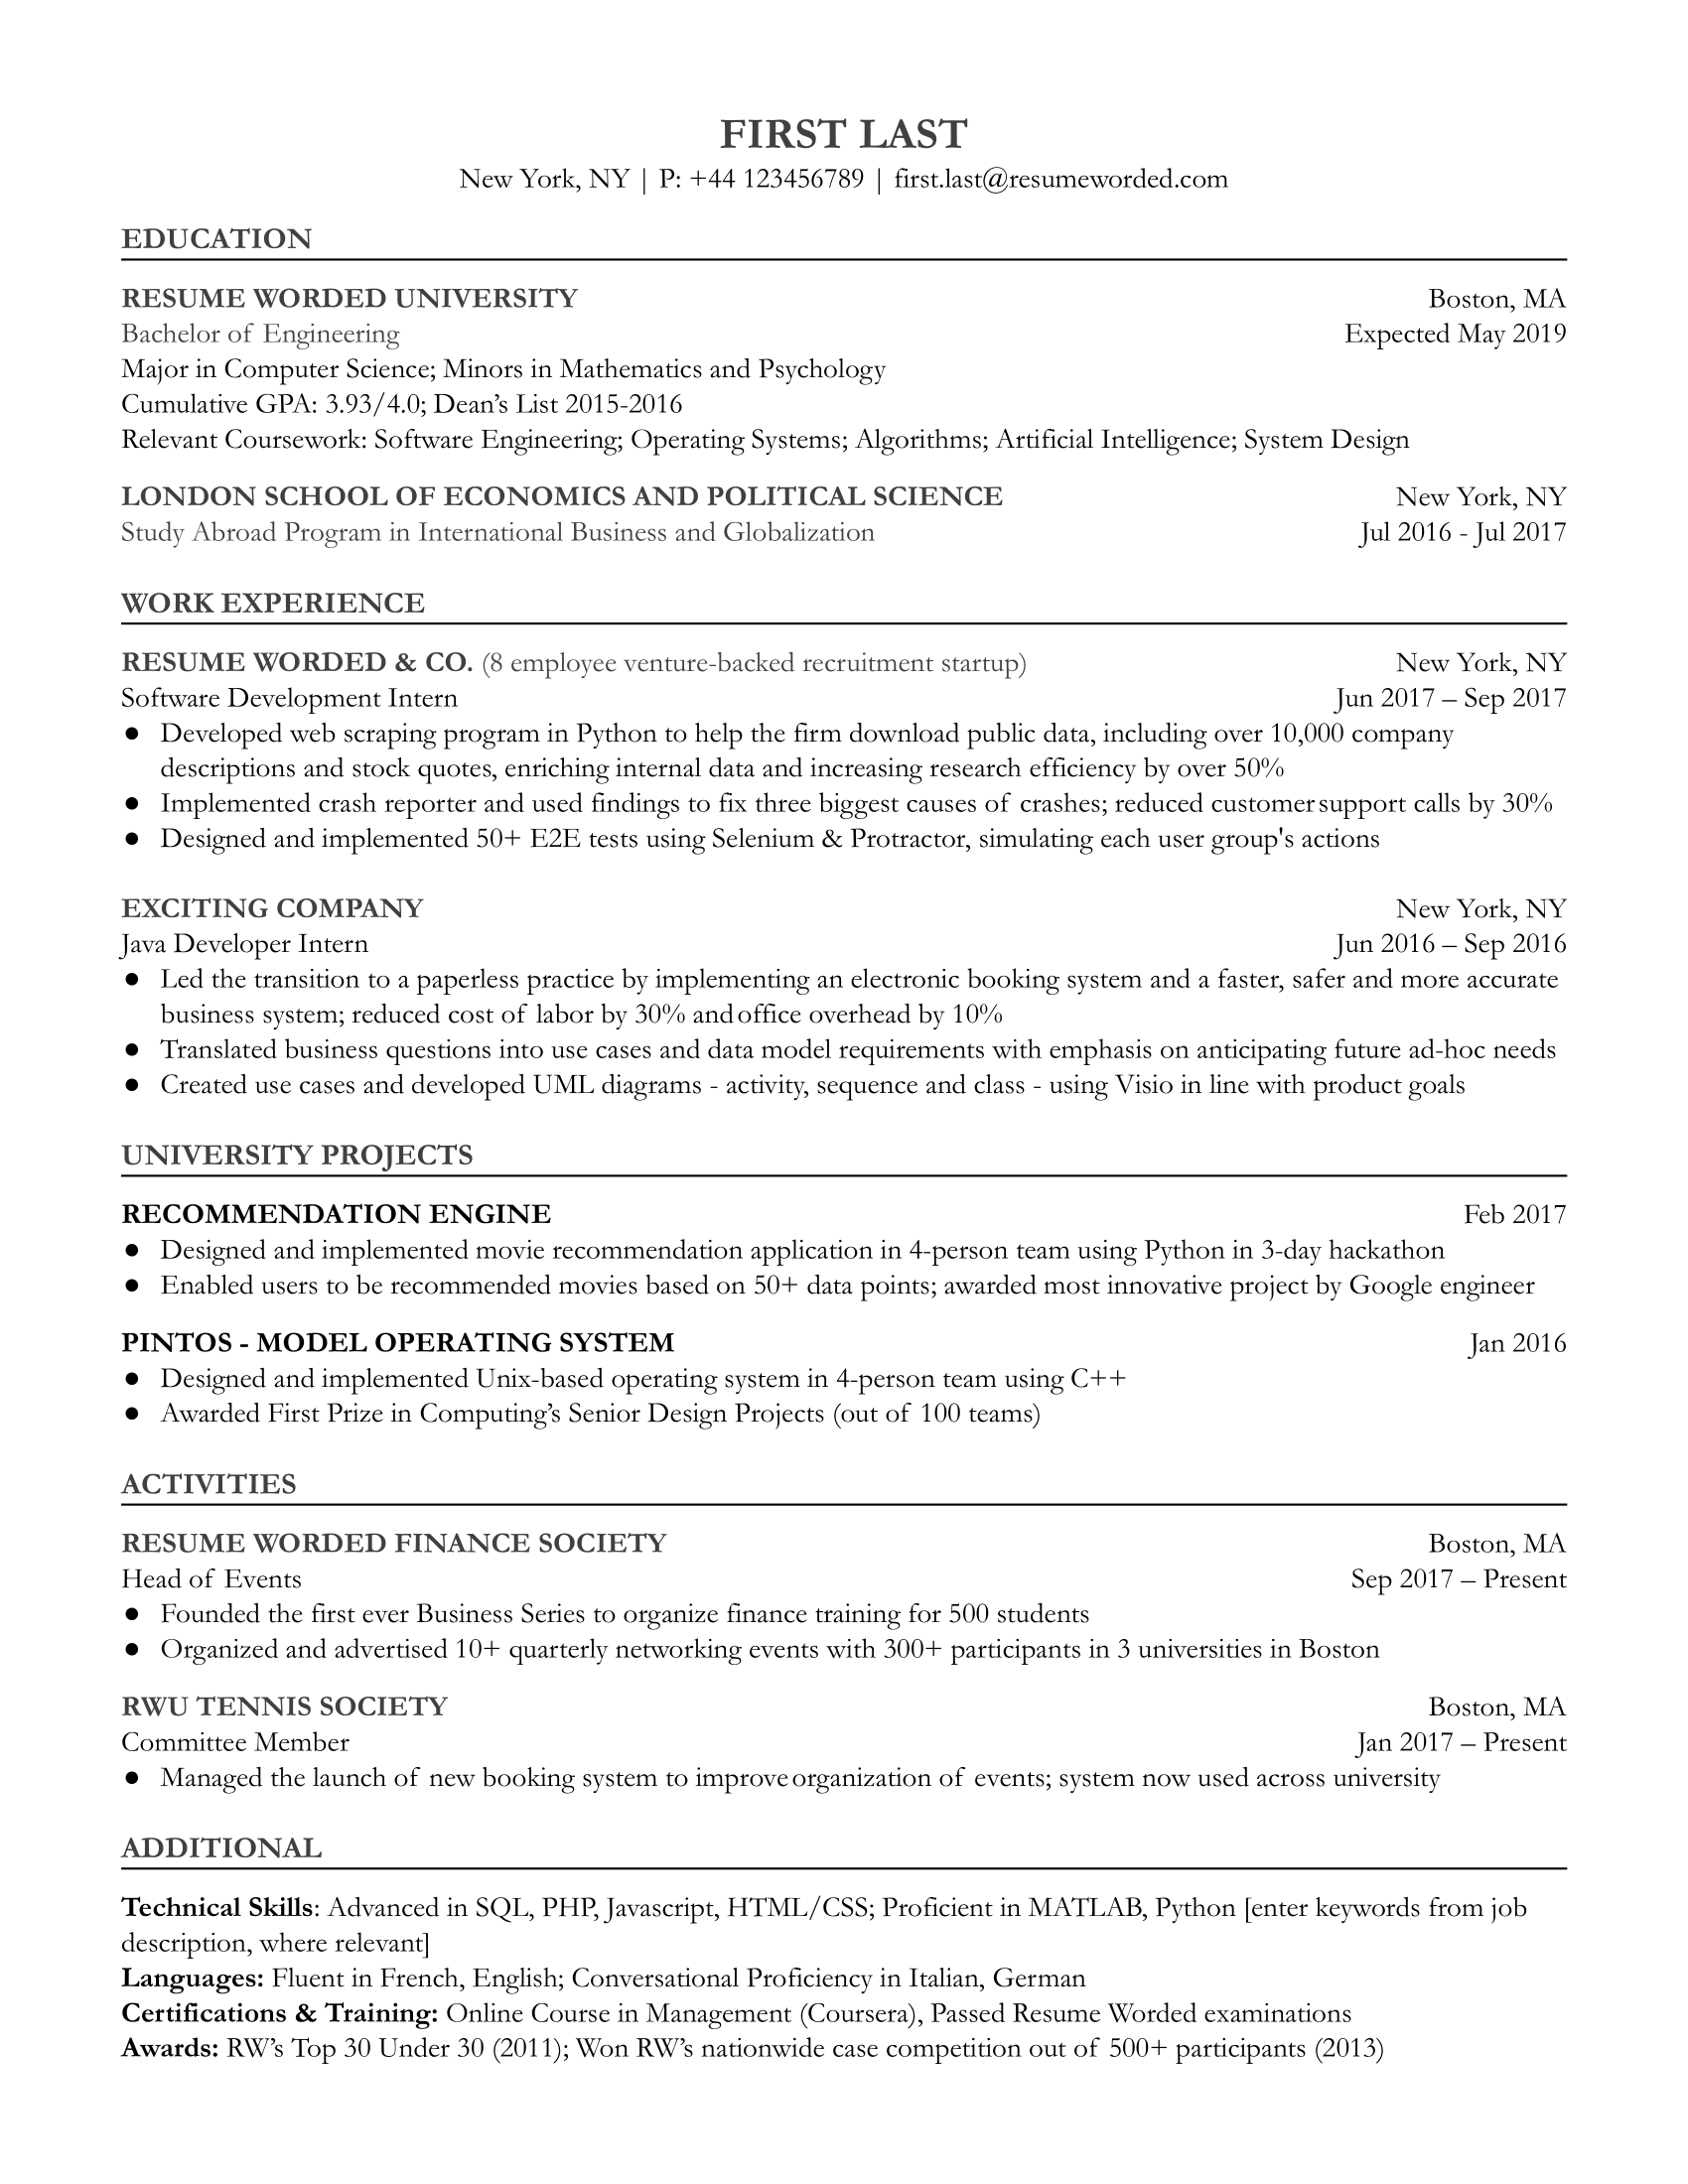 A CV for an entry level software engineer role showcasing technical skills and problem-solving abilities.